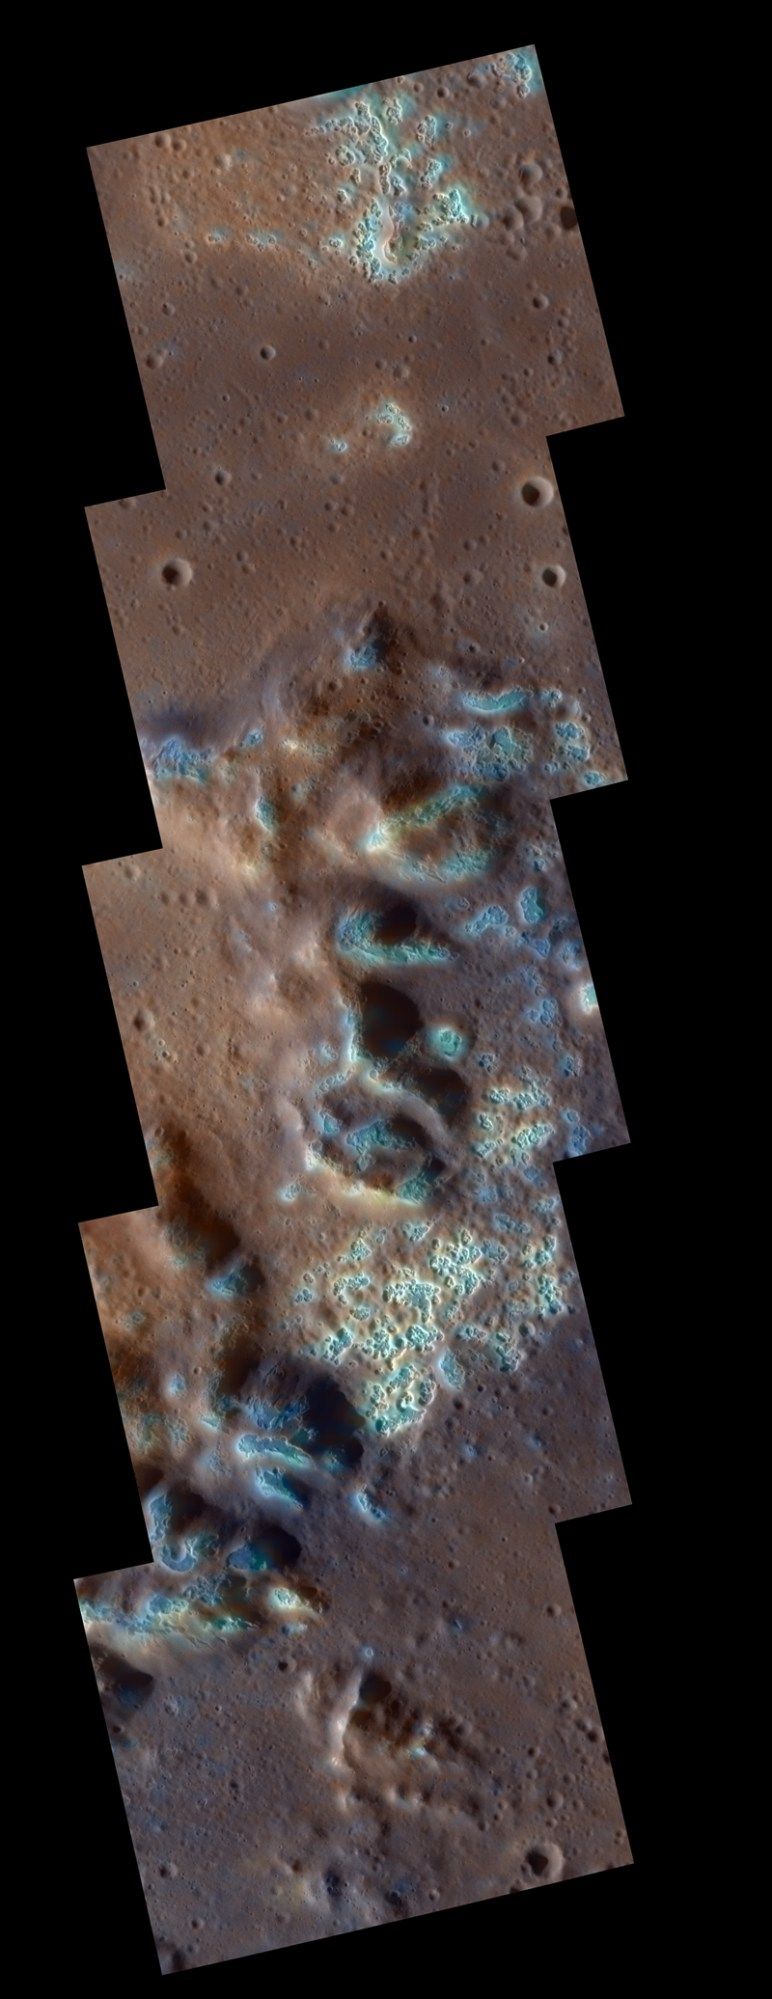 NASA's MESSENGER spacecraft discovered strange hollows on the surface of Mercury.